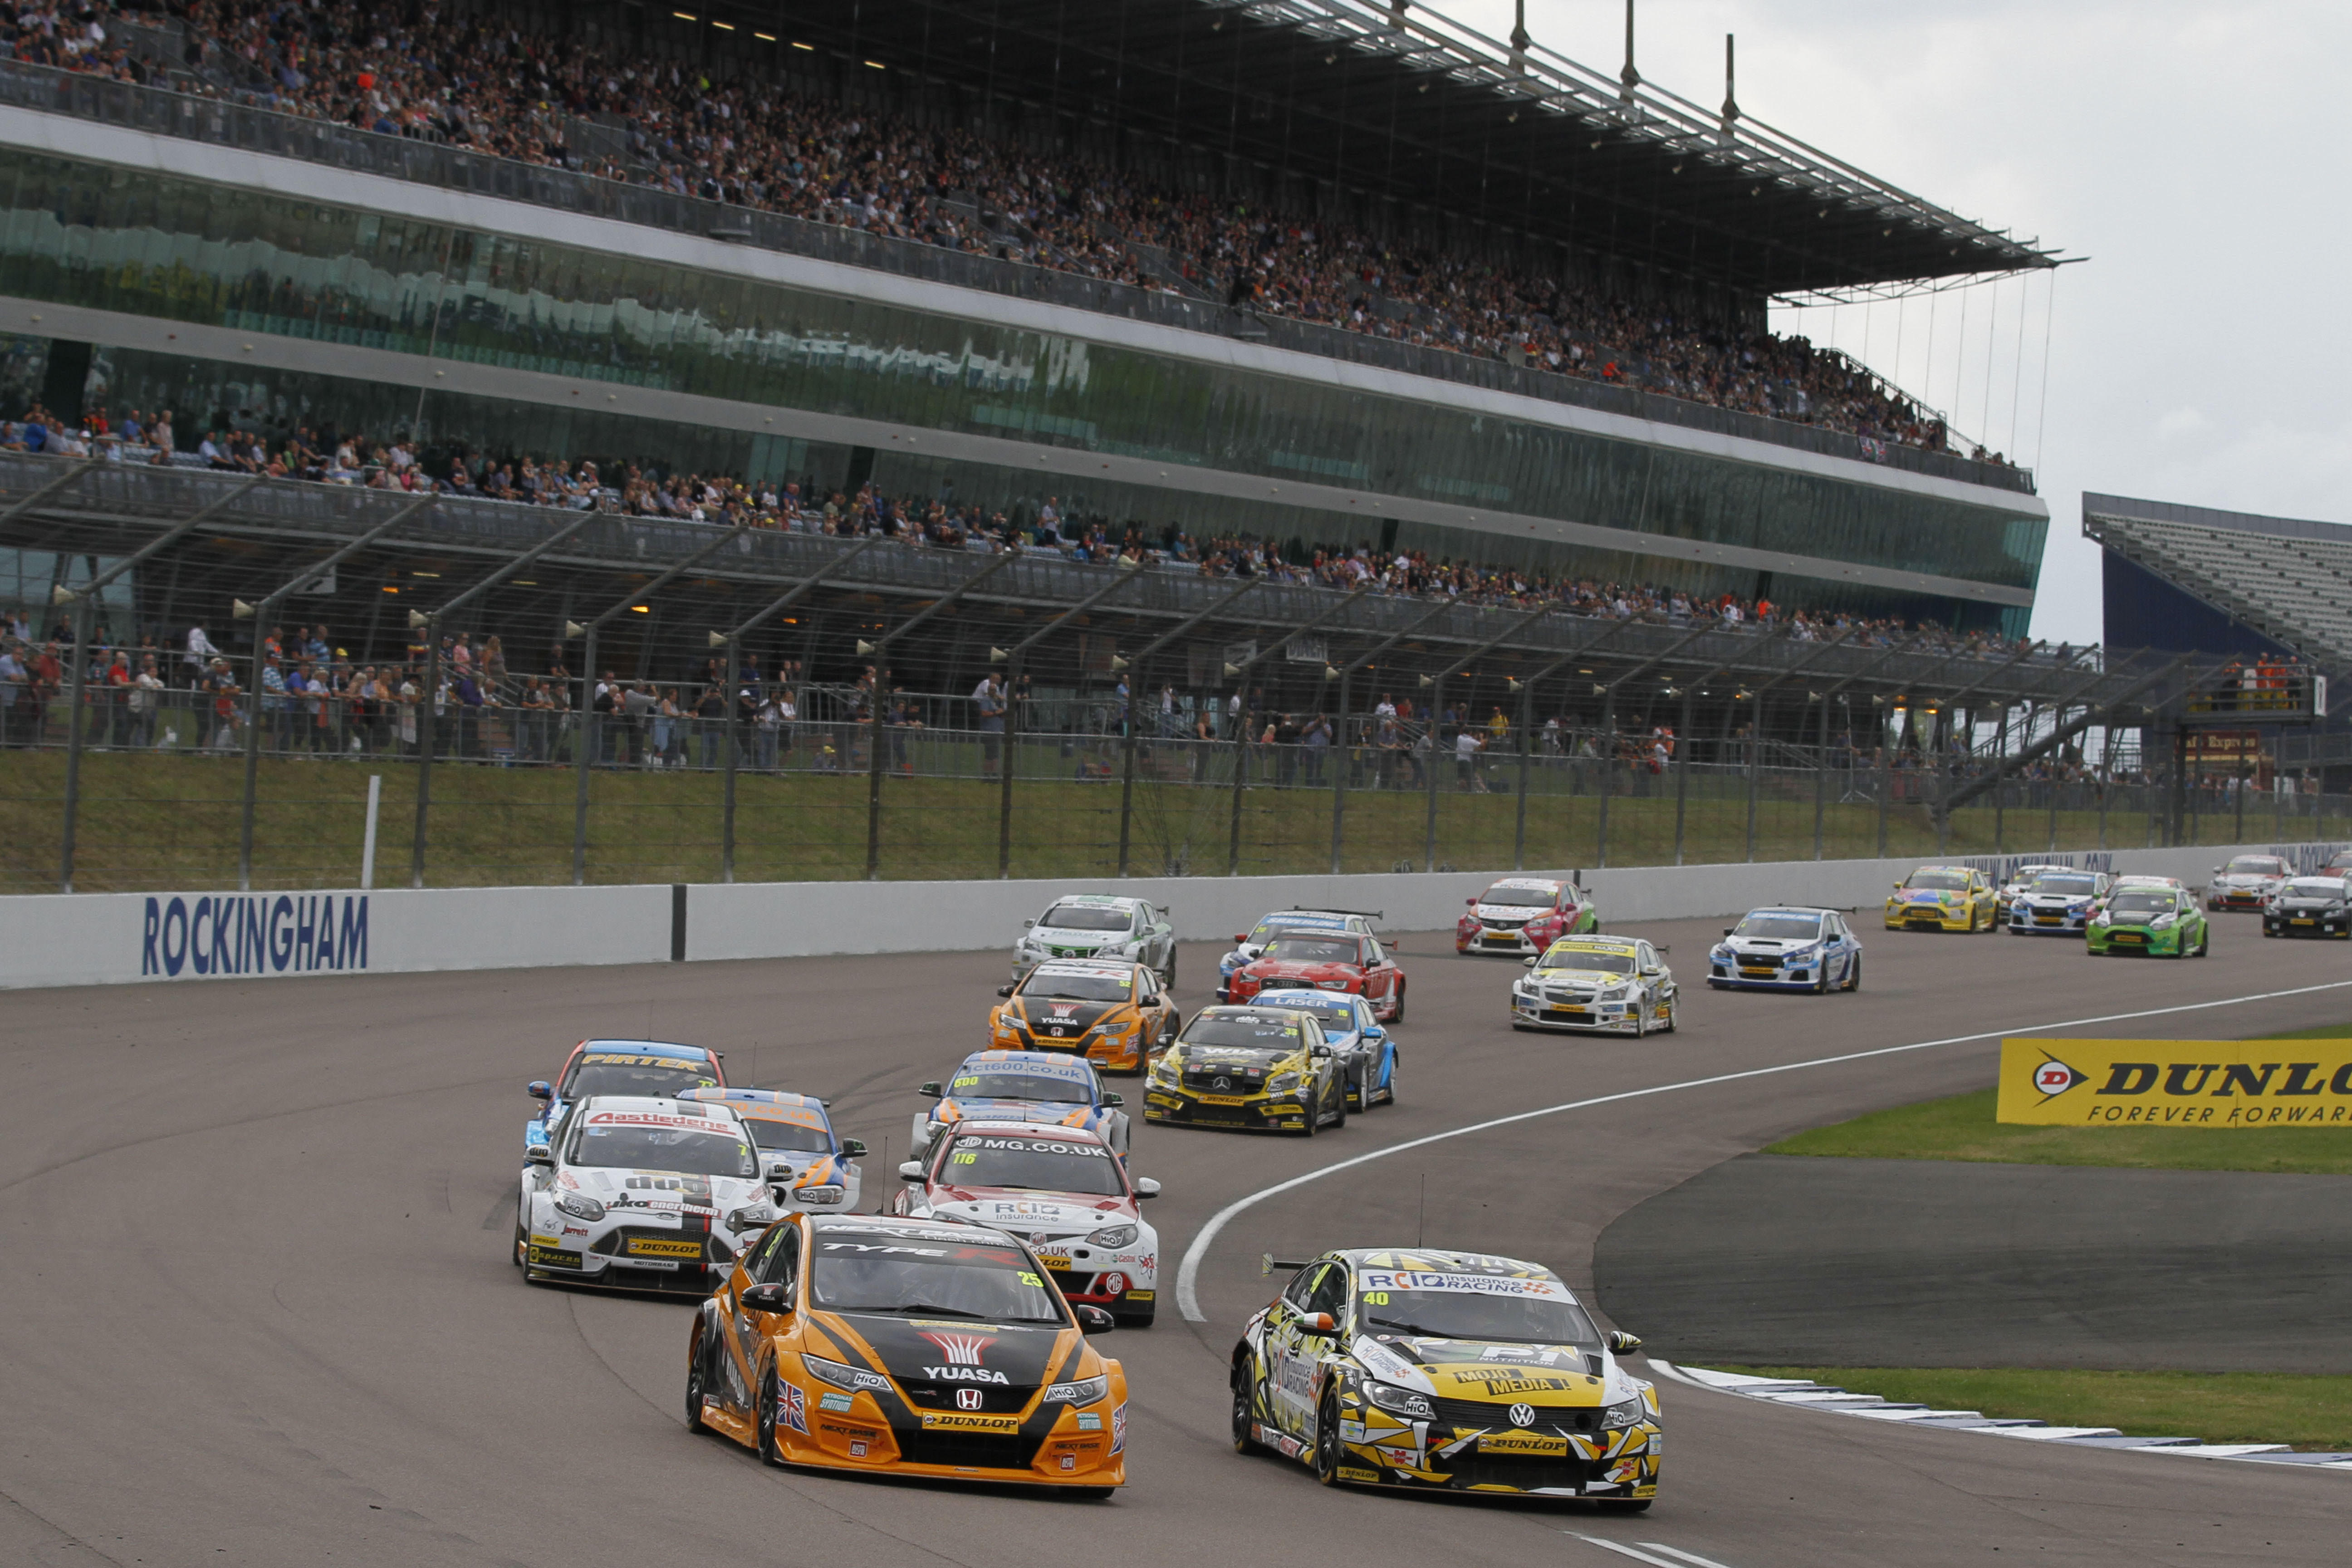 ITS races to upgrade IT infrastructure for Rockingham Motor Speedway